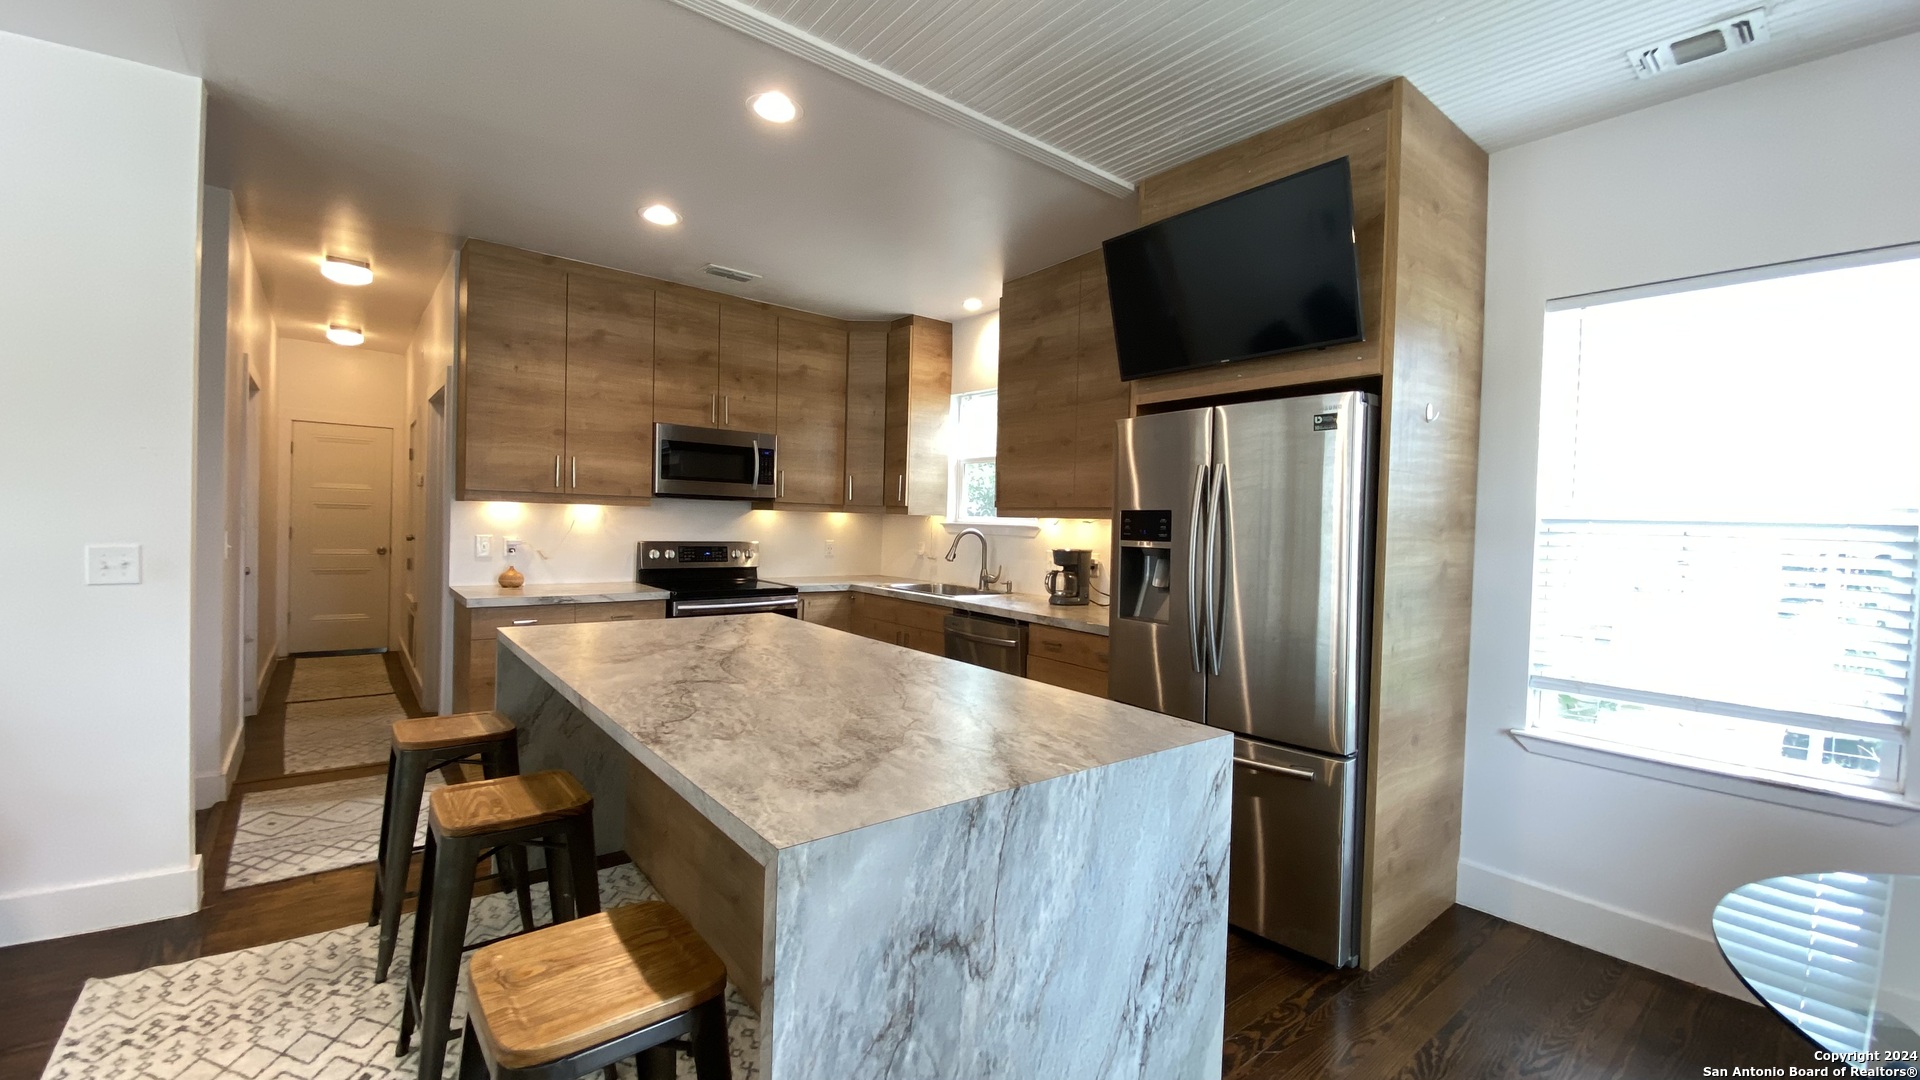 a kitchen with kitchen island a counter top space appliances and a refrigerator